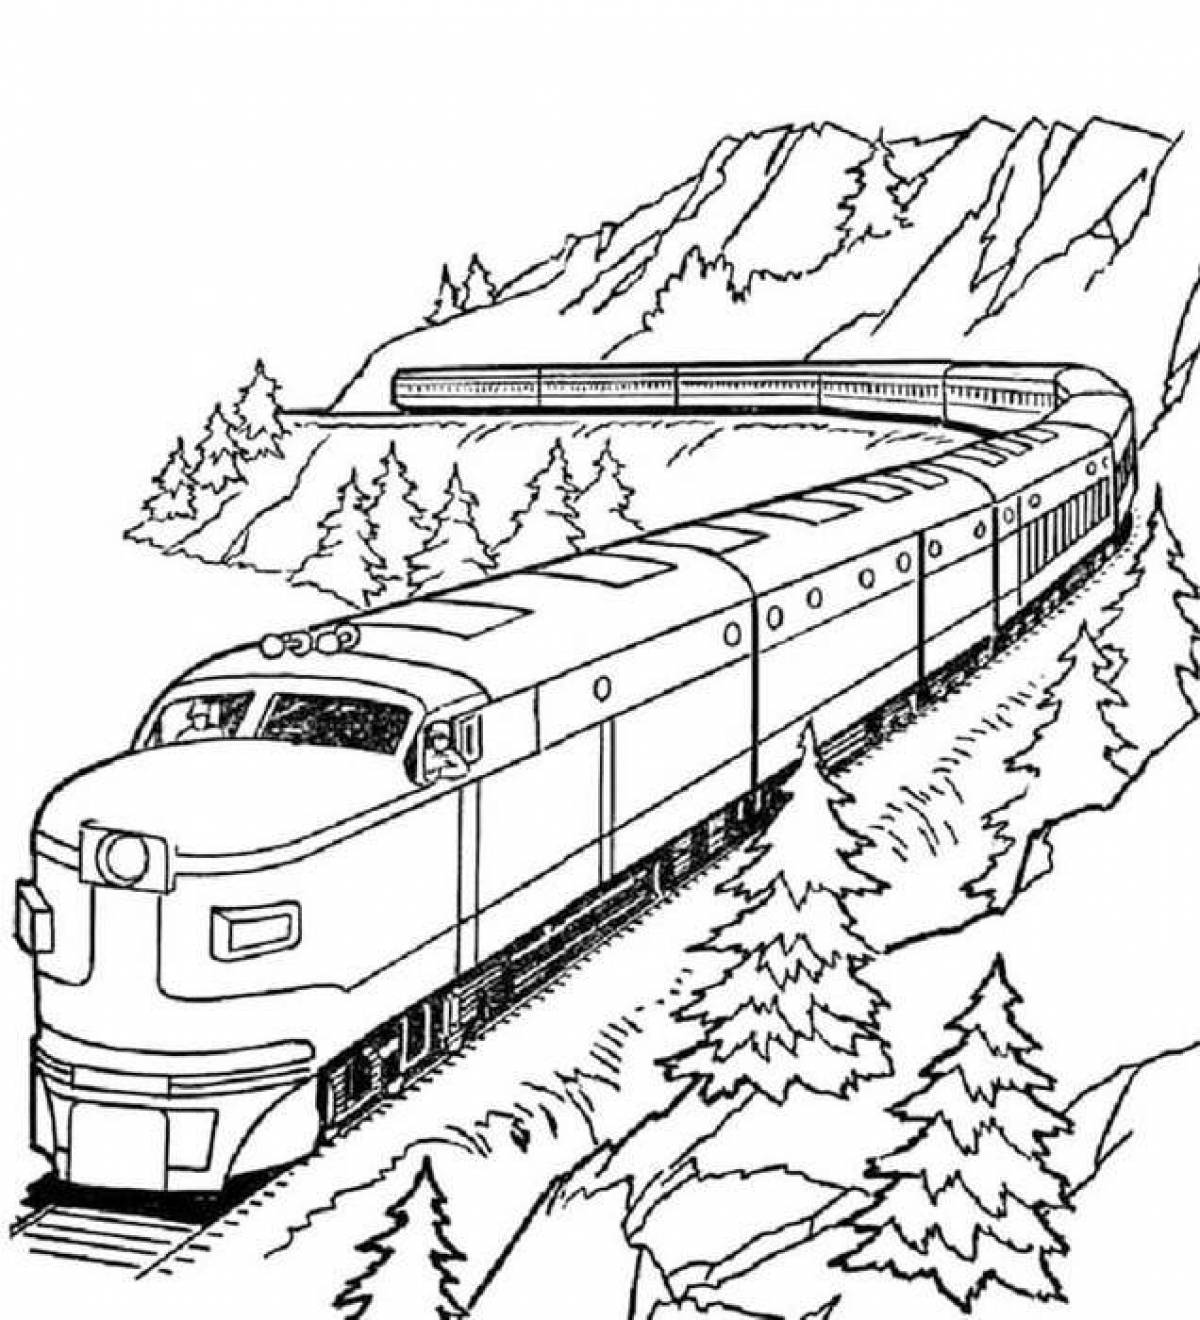 Coloring page happy train with swallows